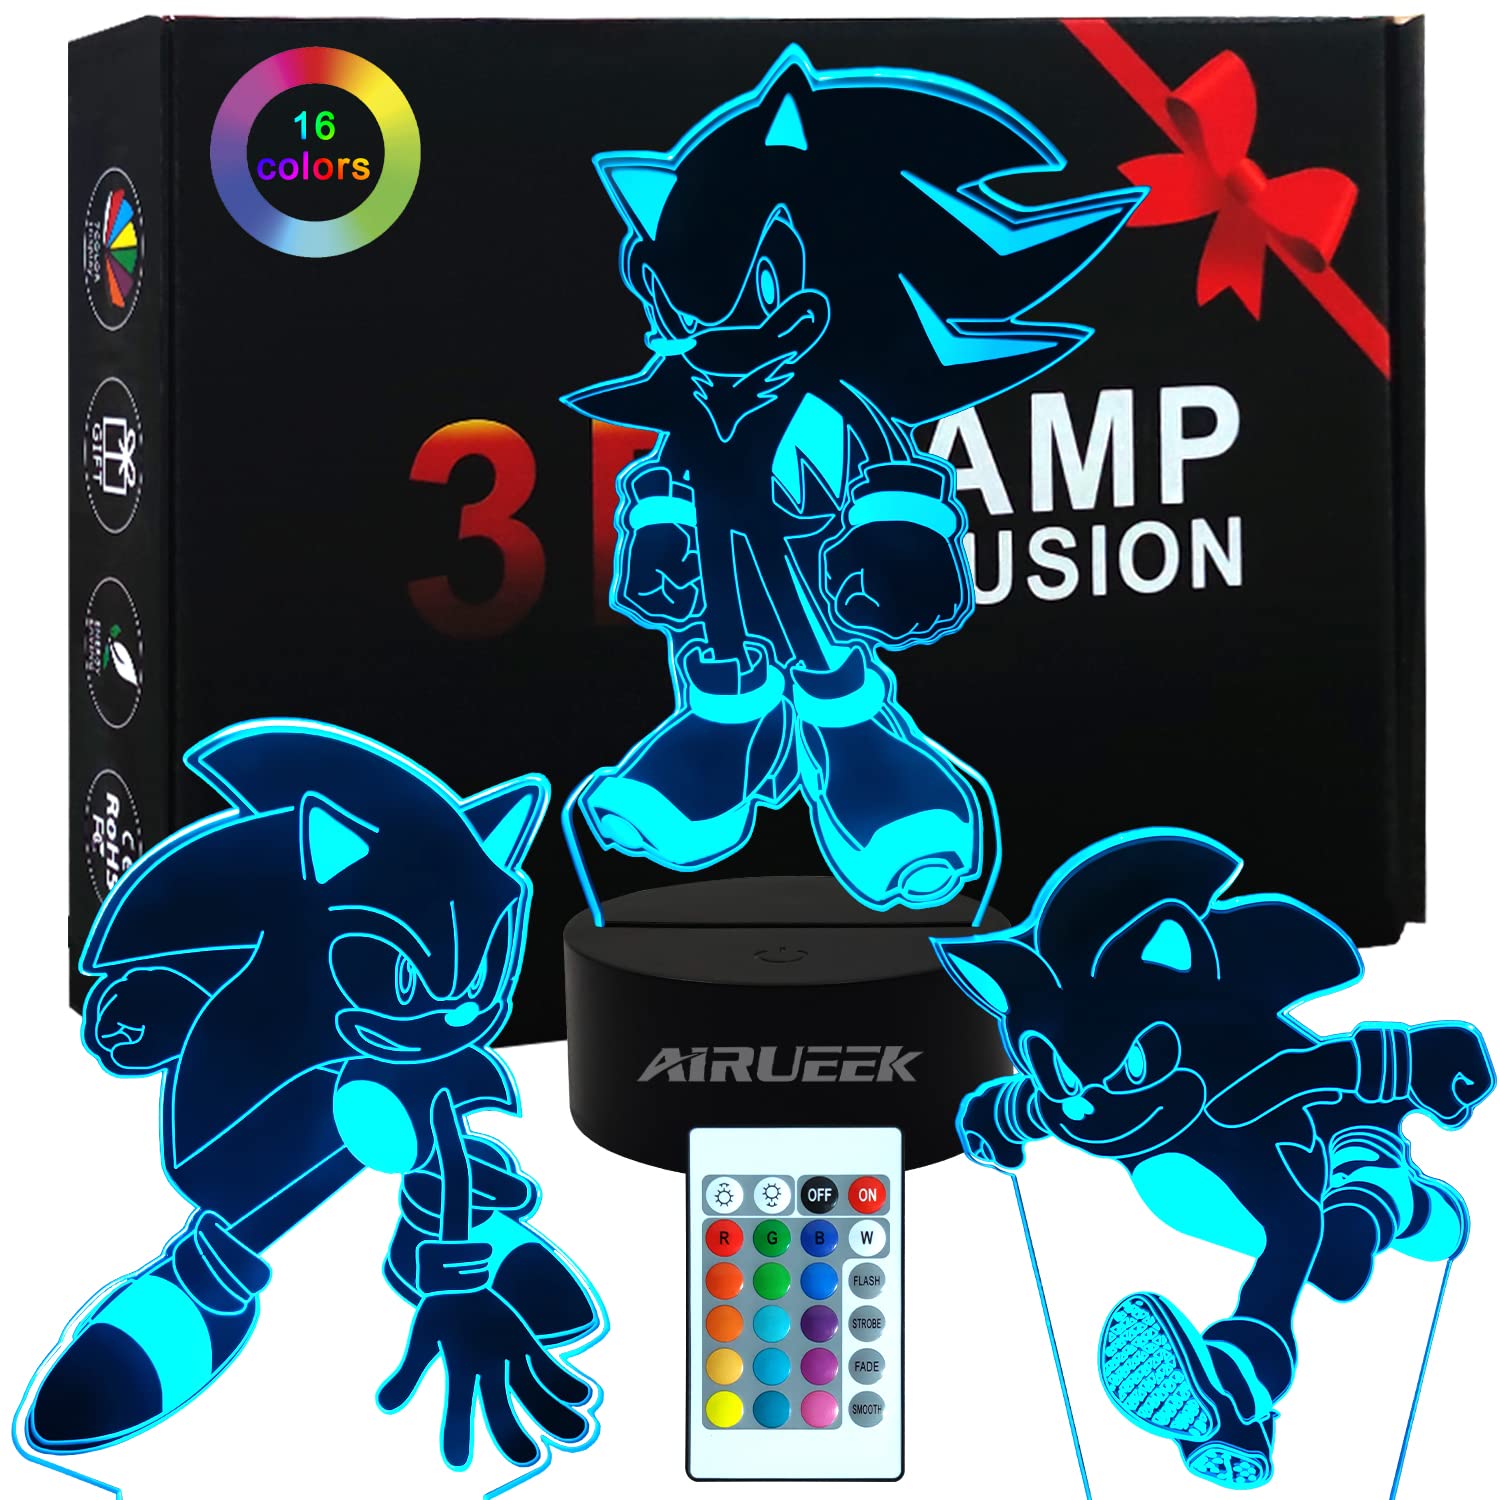 Sonic Toys Night Light 3D Illusion Lamp-16 Color Variations/3Pack Acrylic Board /1 Remote/1 Black Base/-Bedroom Decoration Creative Anime Sonic Hedgehog Gifts for Women Kids Boys Sonic Fans